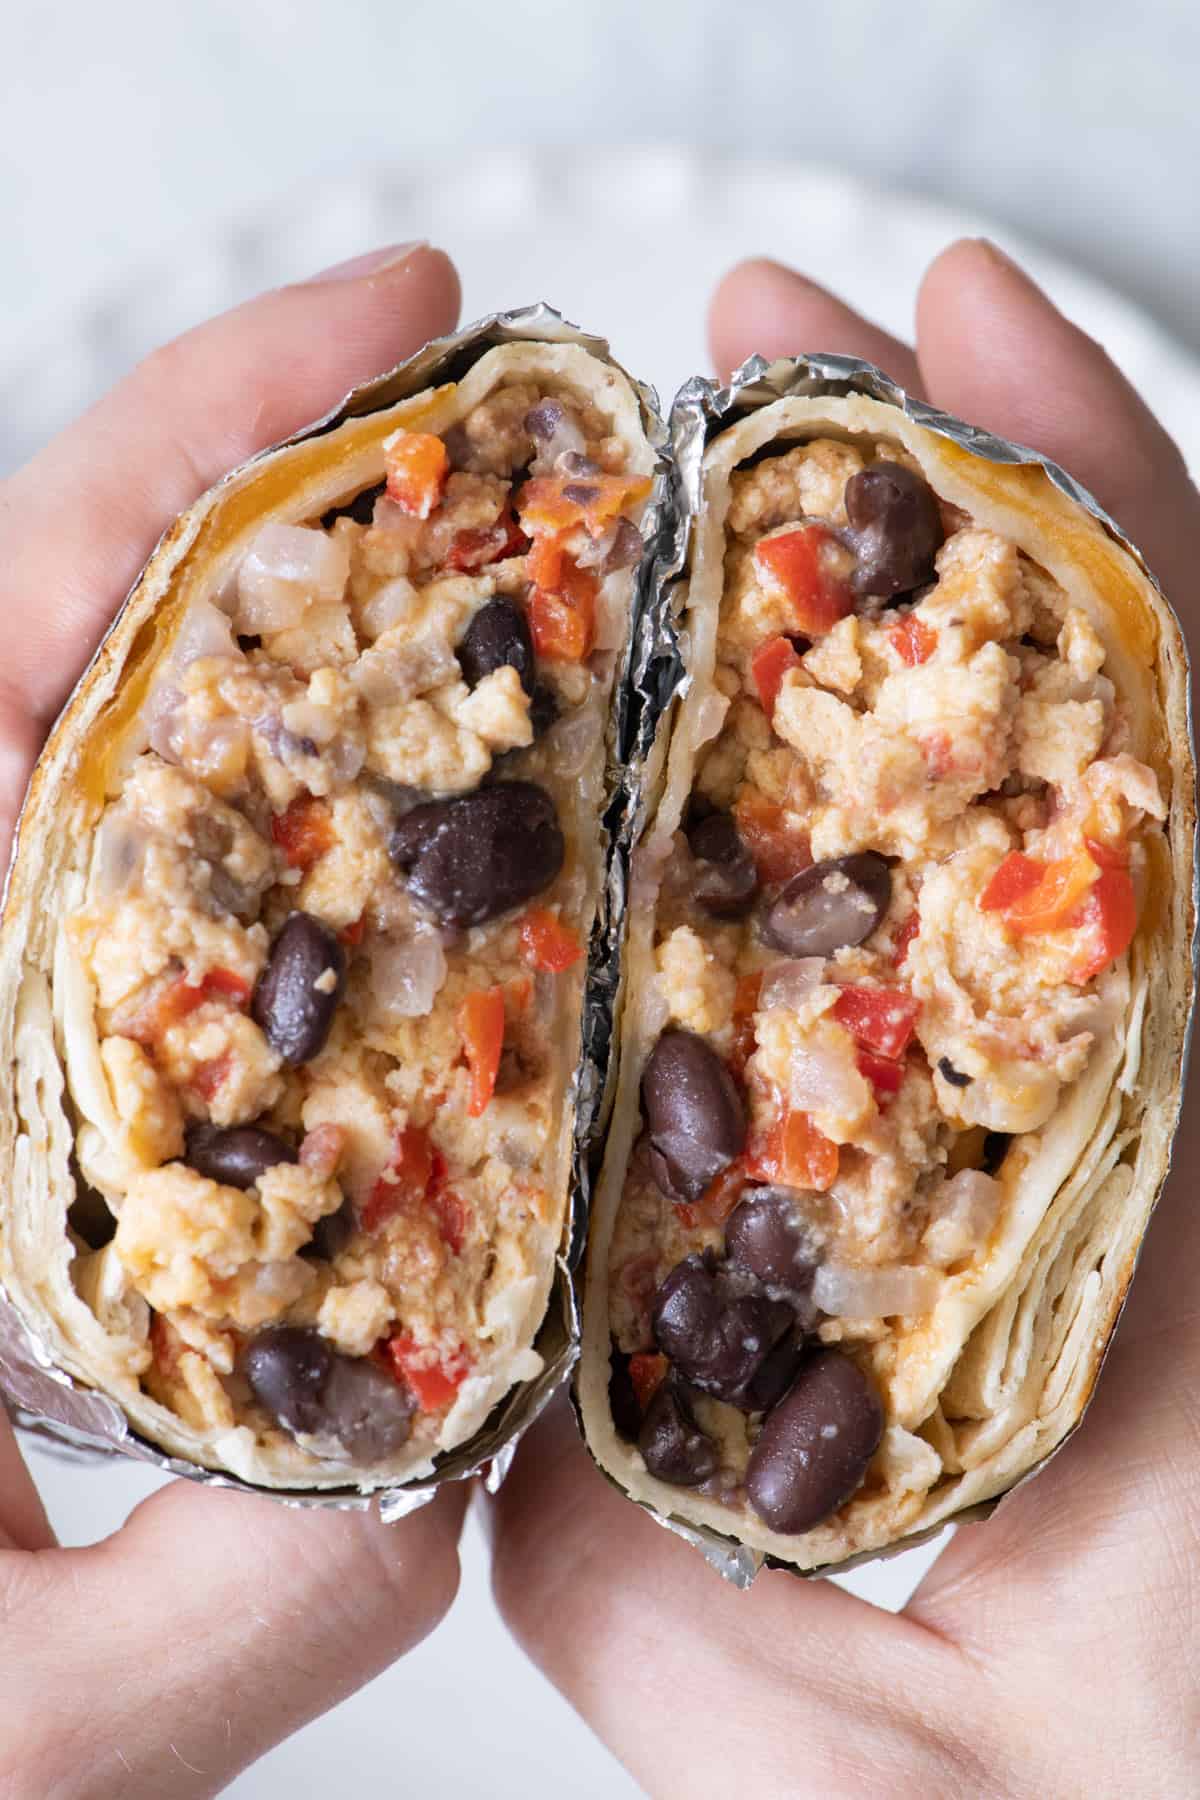 One burrito wrapped in foil, cut in half with hands holding both halves side by side.